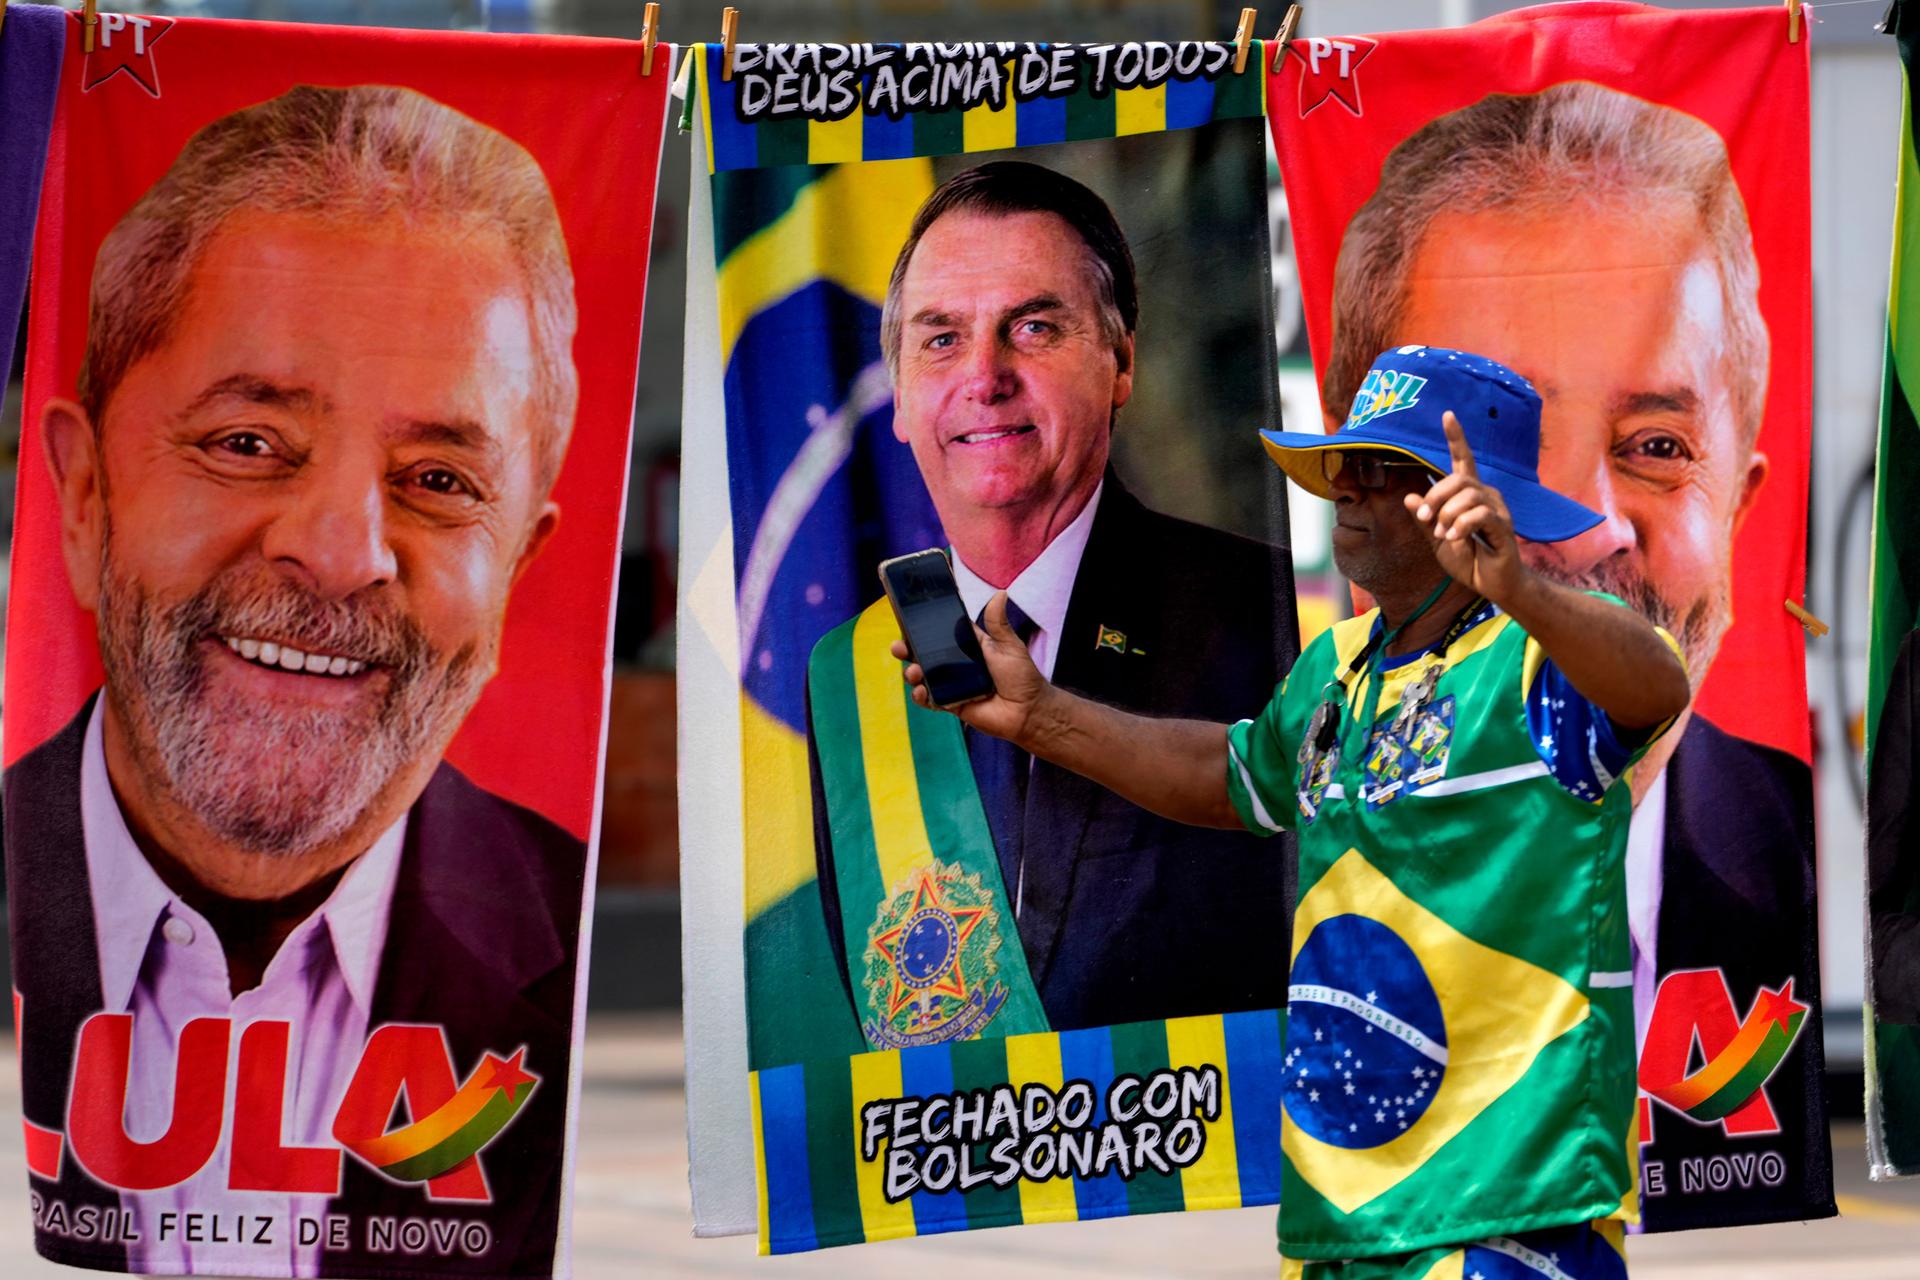 A demonstrator dressed in the colors of the Brazilian flag performs in front of a street vendor's towels for sale featuring Brazilian presidential candidates, current President Jair Bolsonaro, center, and former President Luiz Inacio Lula da Silva, in Bra